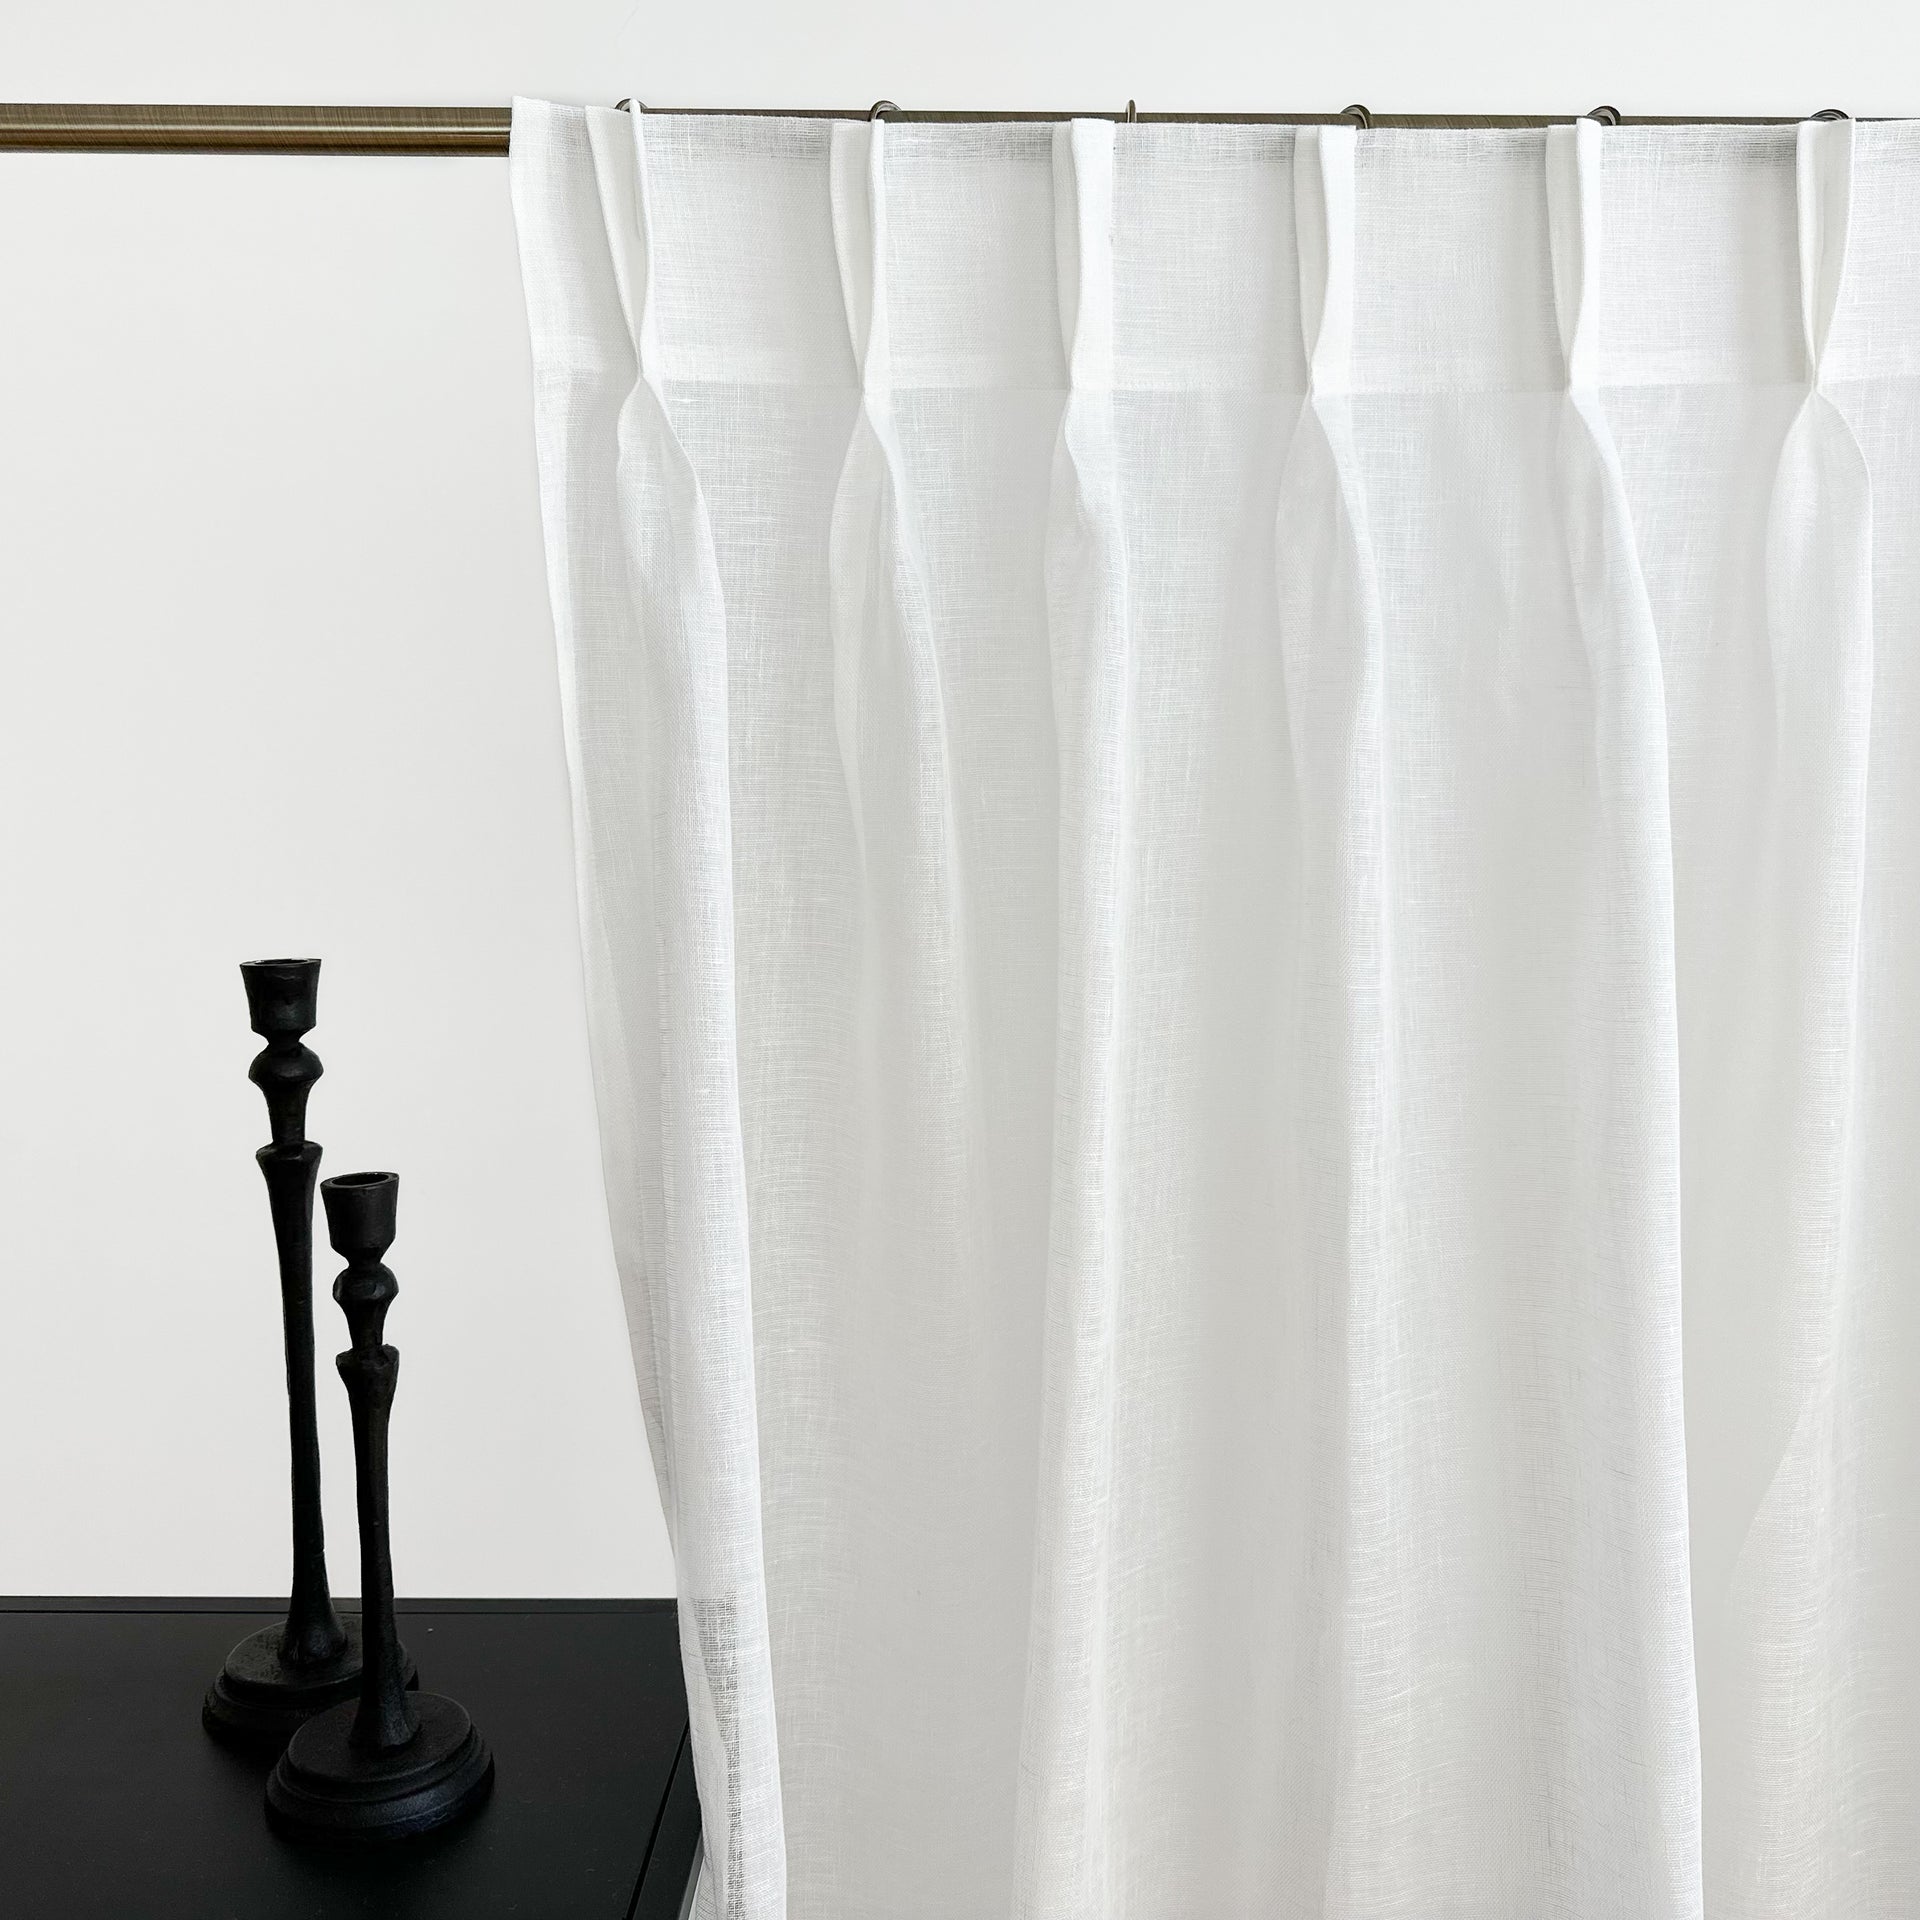 Sheer Curtain in Off-White Color